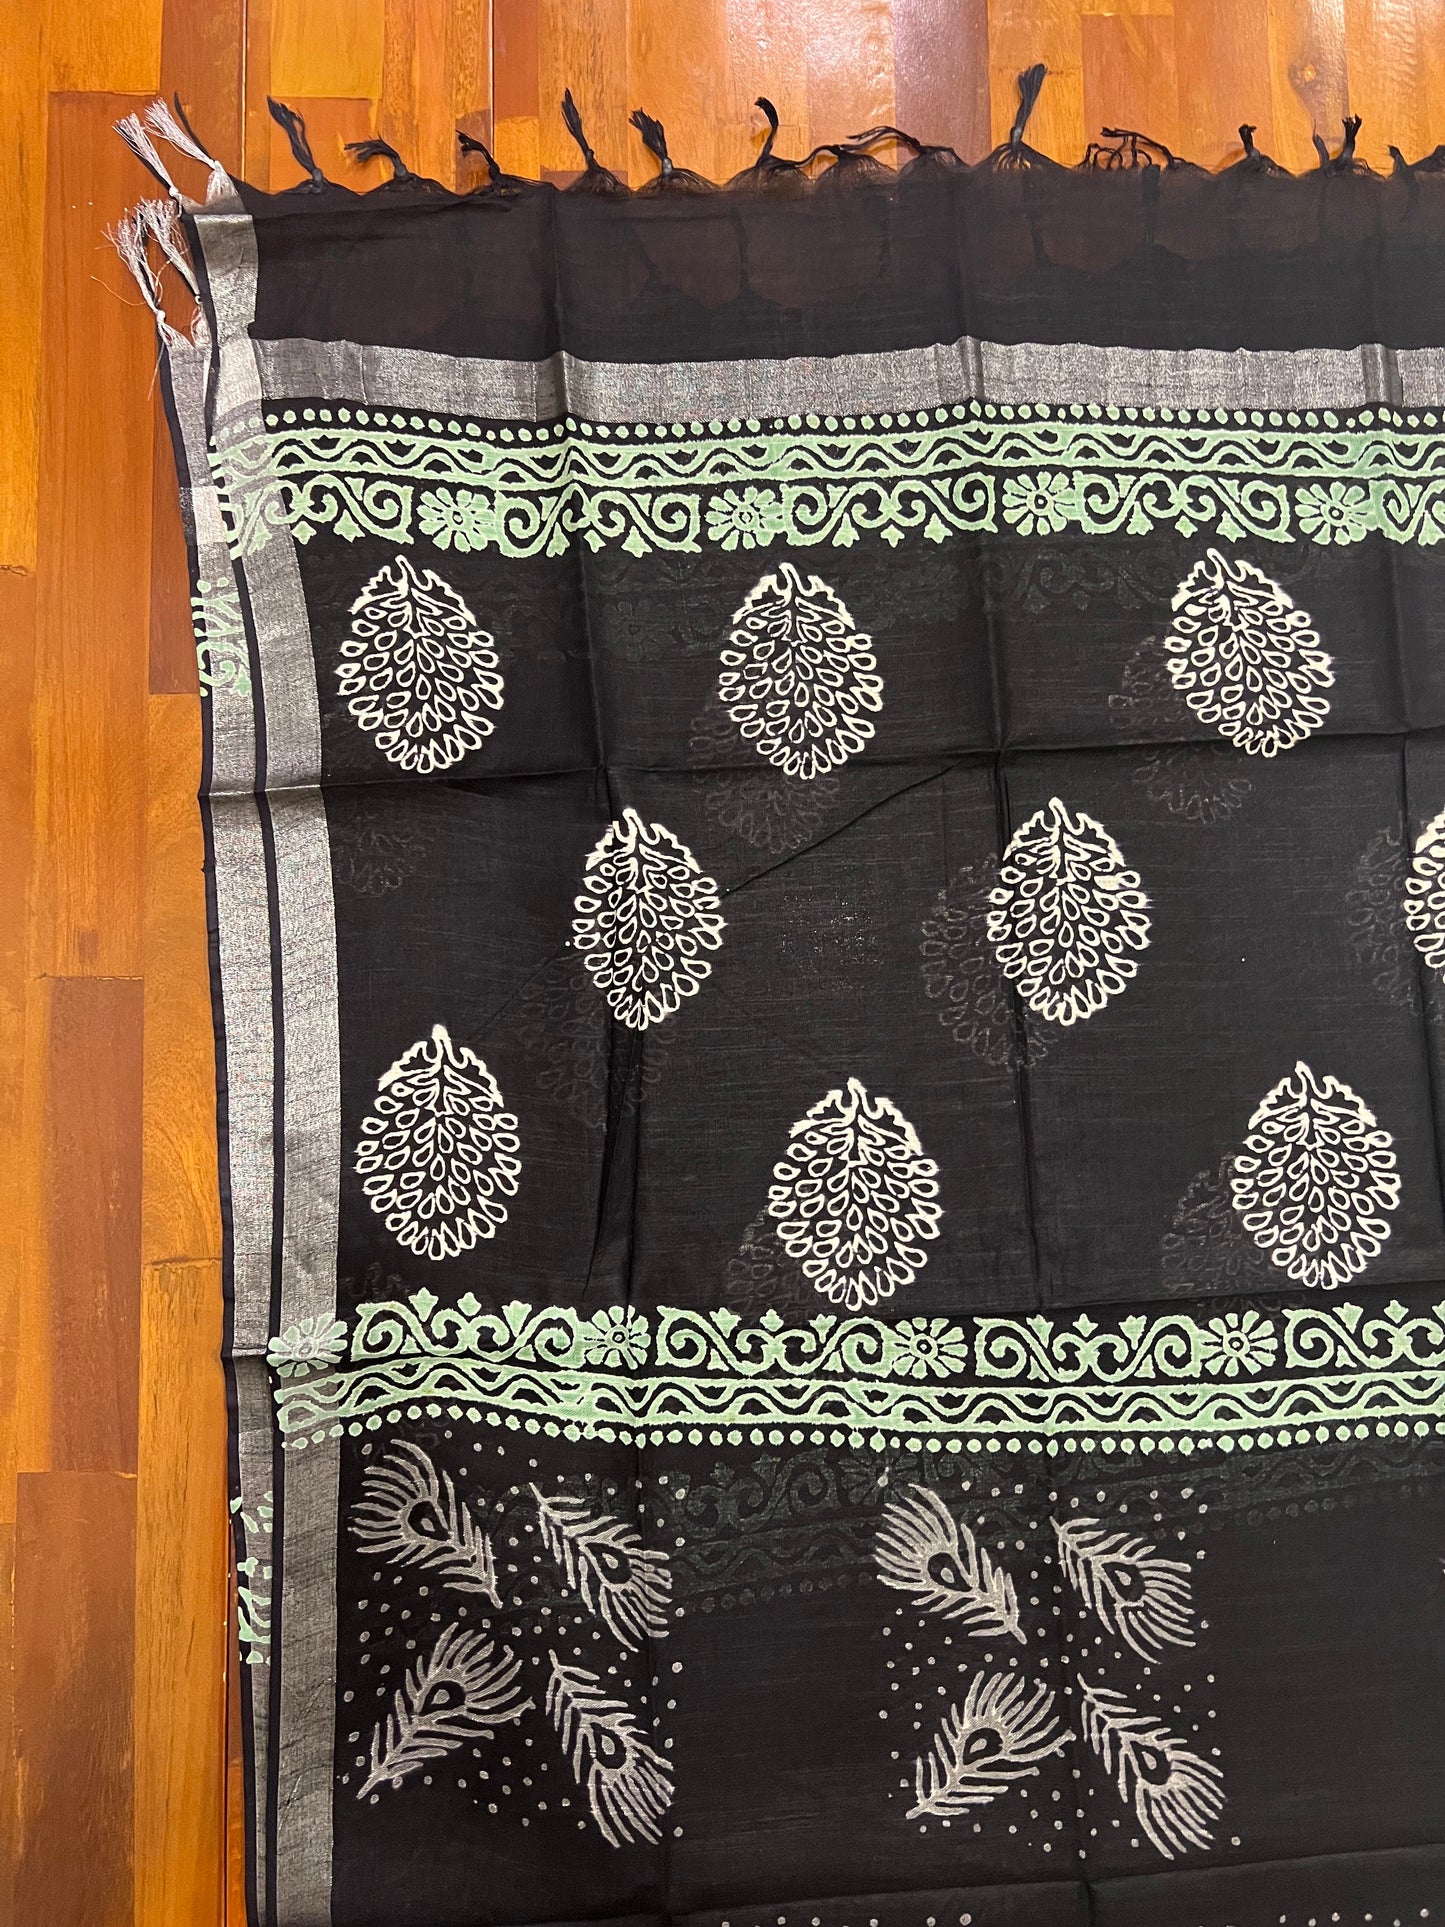 Southloom™ Cotton Churidar Salwar Suit Material in Black with White Floral Prints